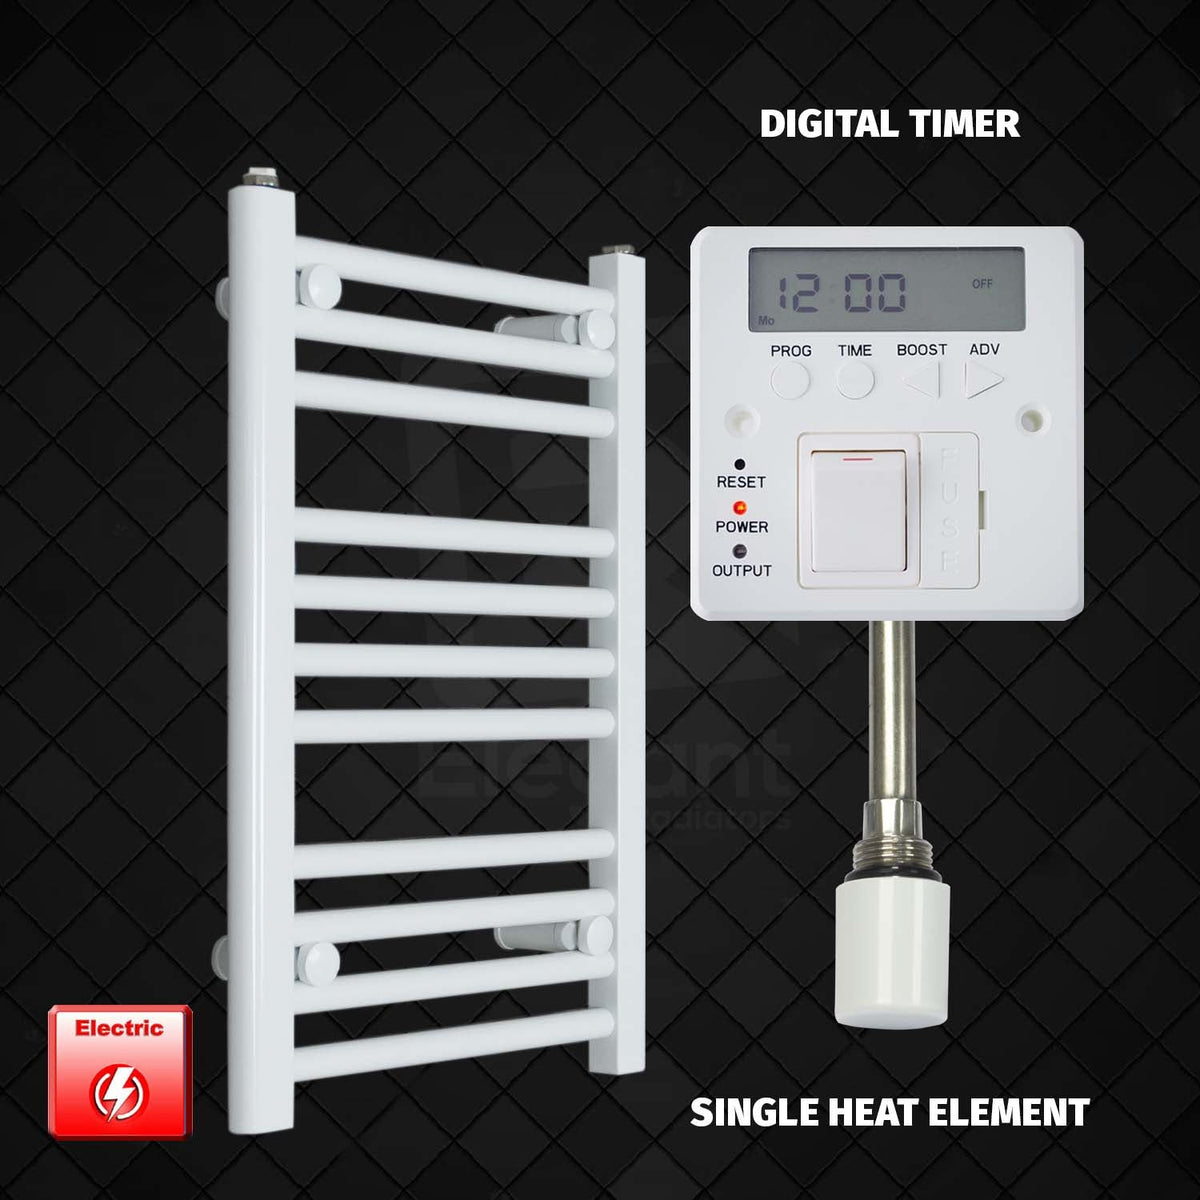 600 mm High 450 mm Wide Pre-Filled Electric Heated Towel Radiator White HTR Digital Timer Single Heat Element